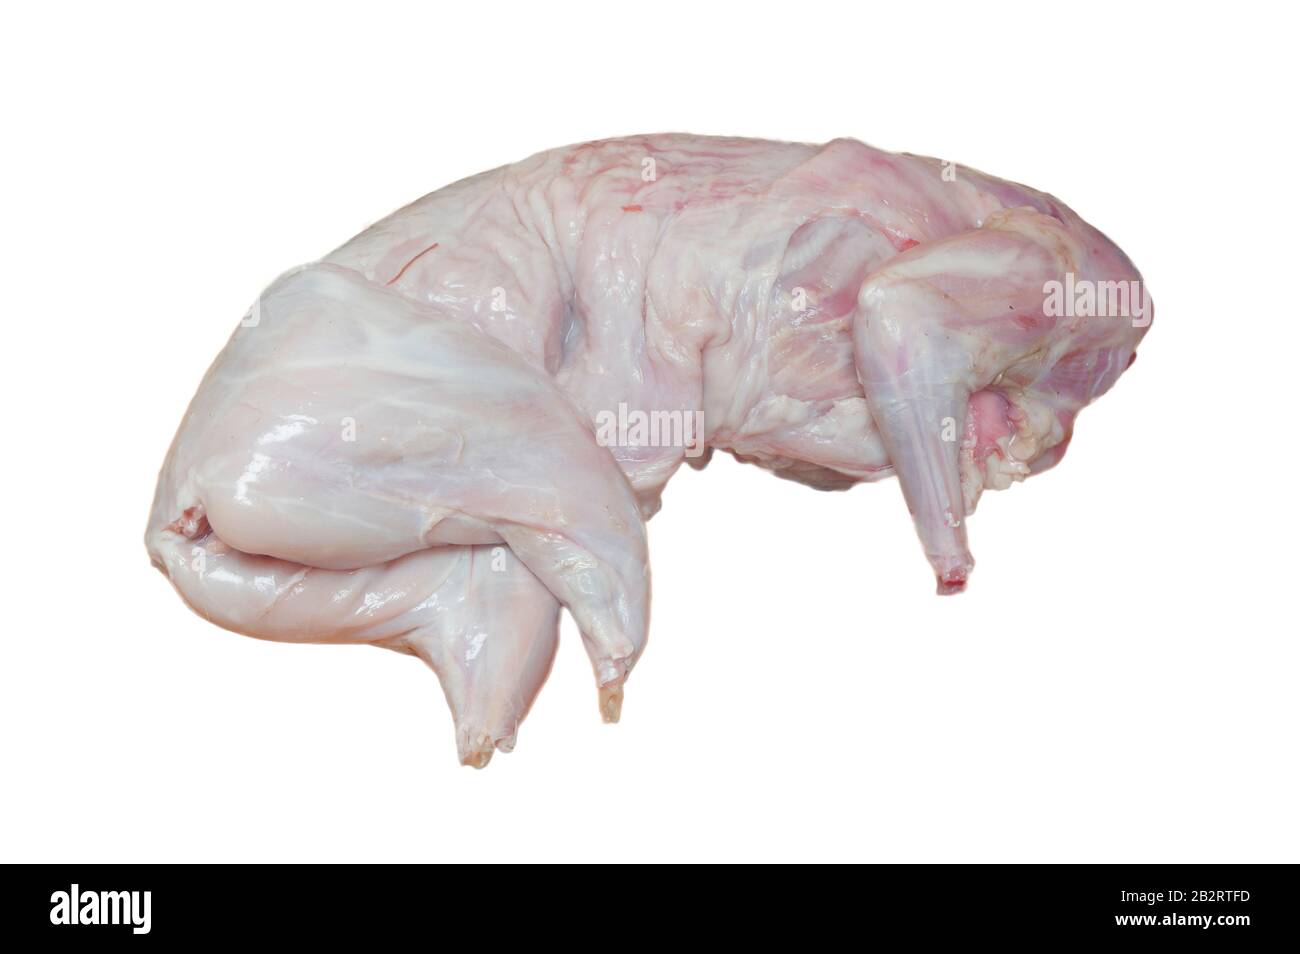 wild hare carcass on a white background in isolation Stock Photo